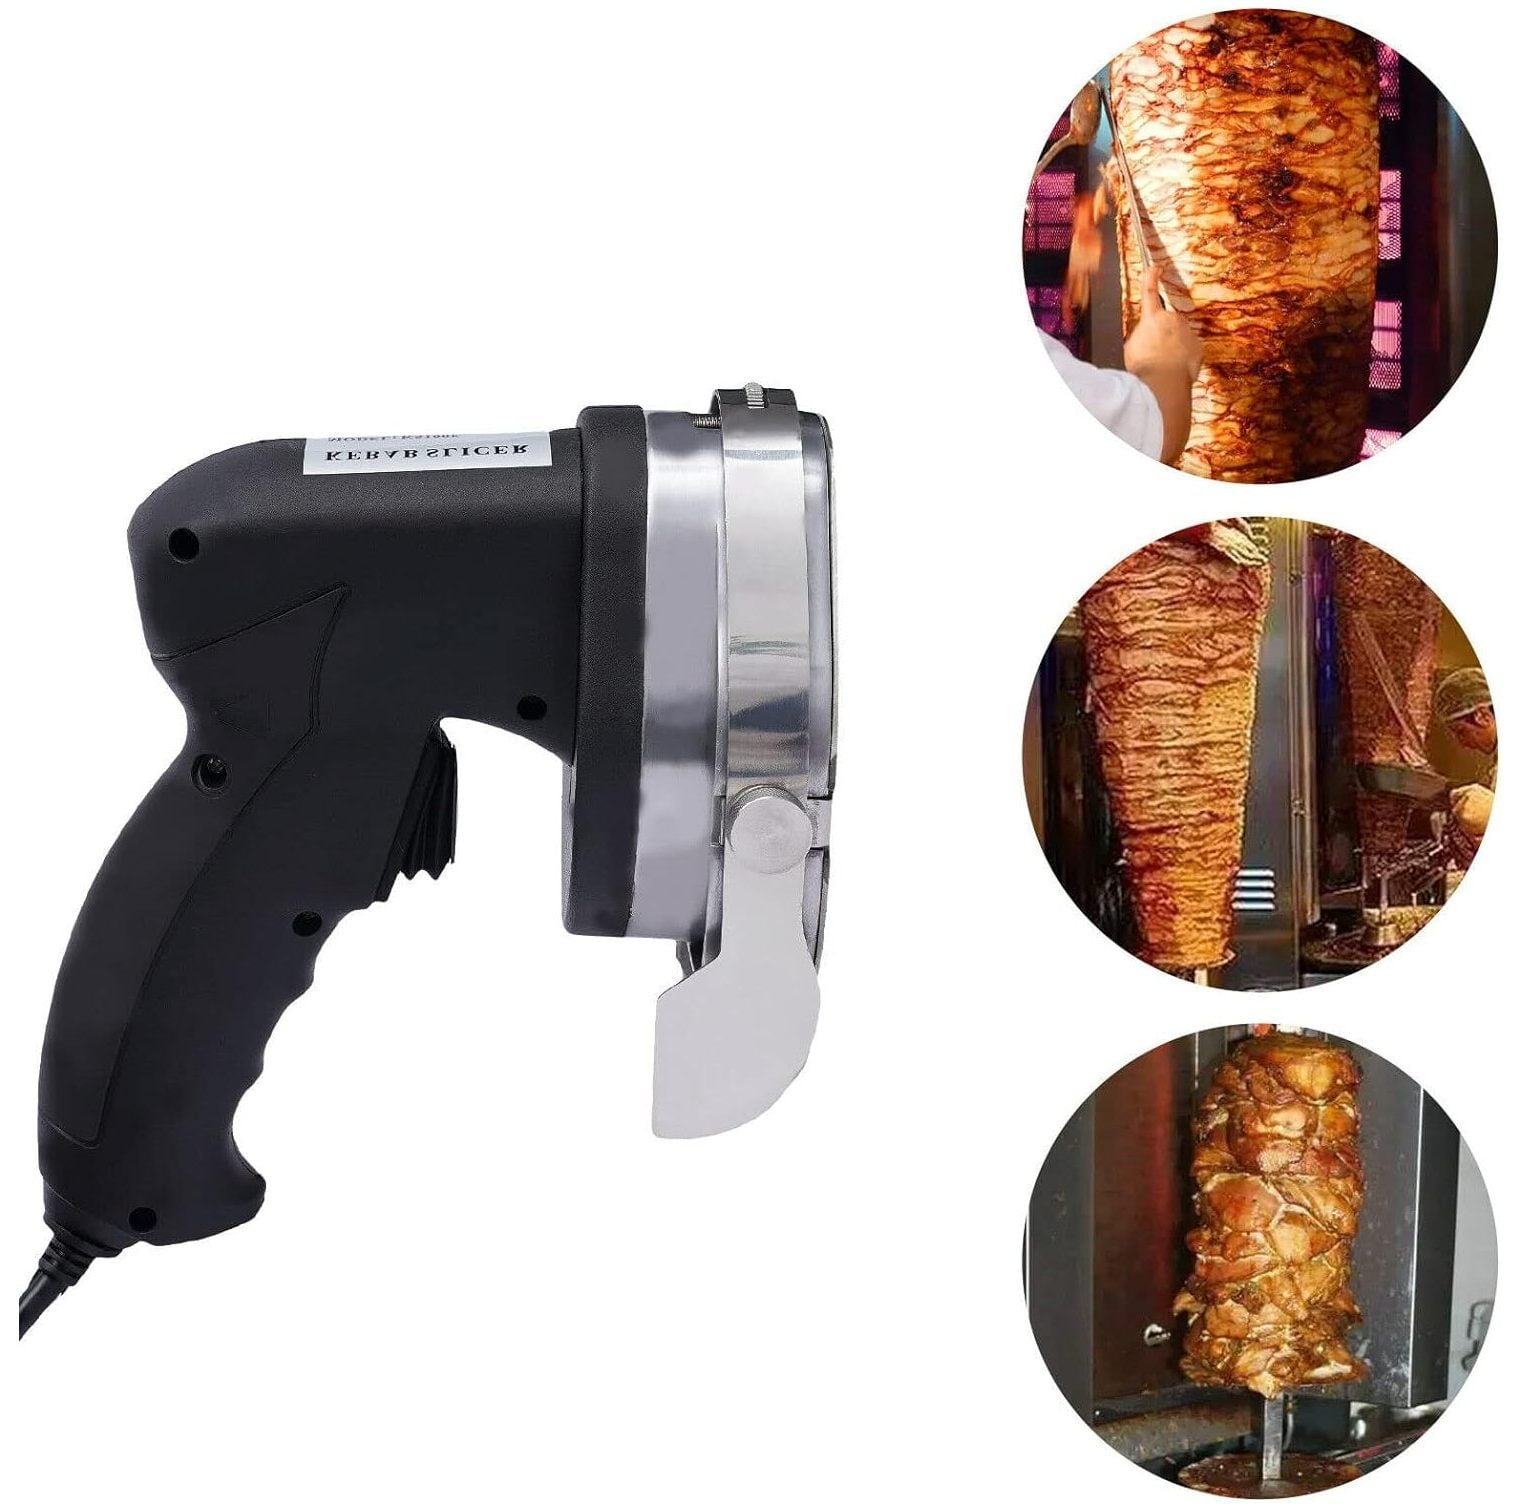  Gyro Knife Electric Kebab Slicer, Handheld Turkish Kebab Knife,  0-8mm Thickness Kebab Meat Slicers with 2 Blades, Gyro Cutter for Shawarma,  Cordless : Home & Kitchen